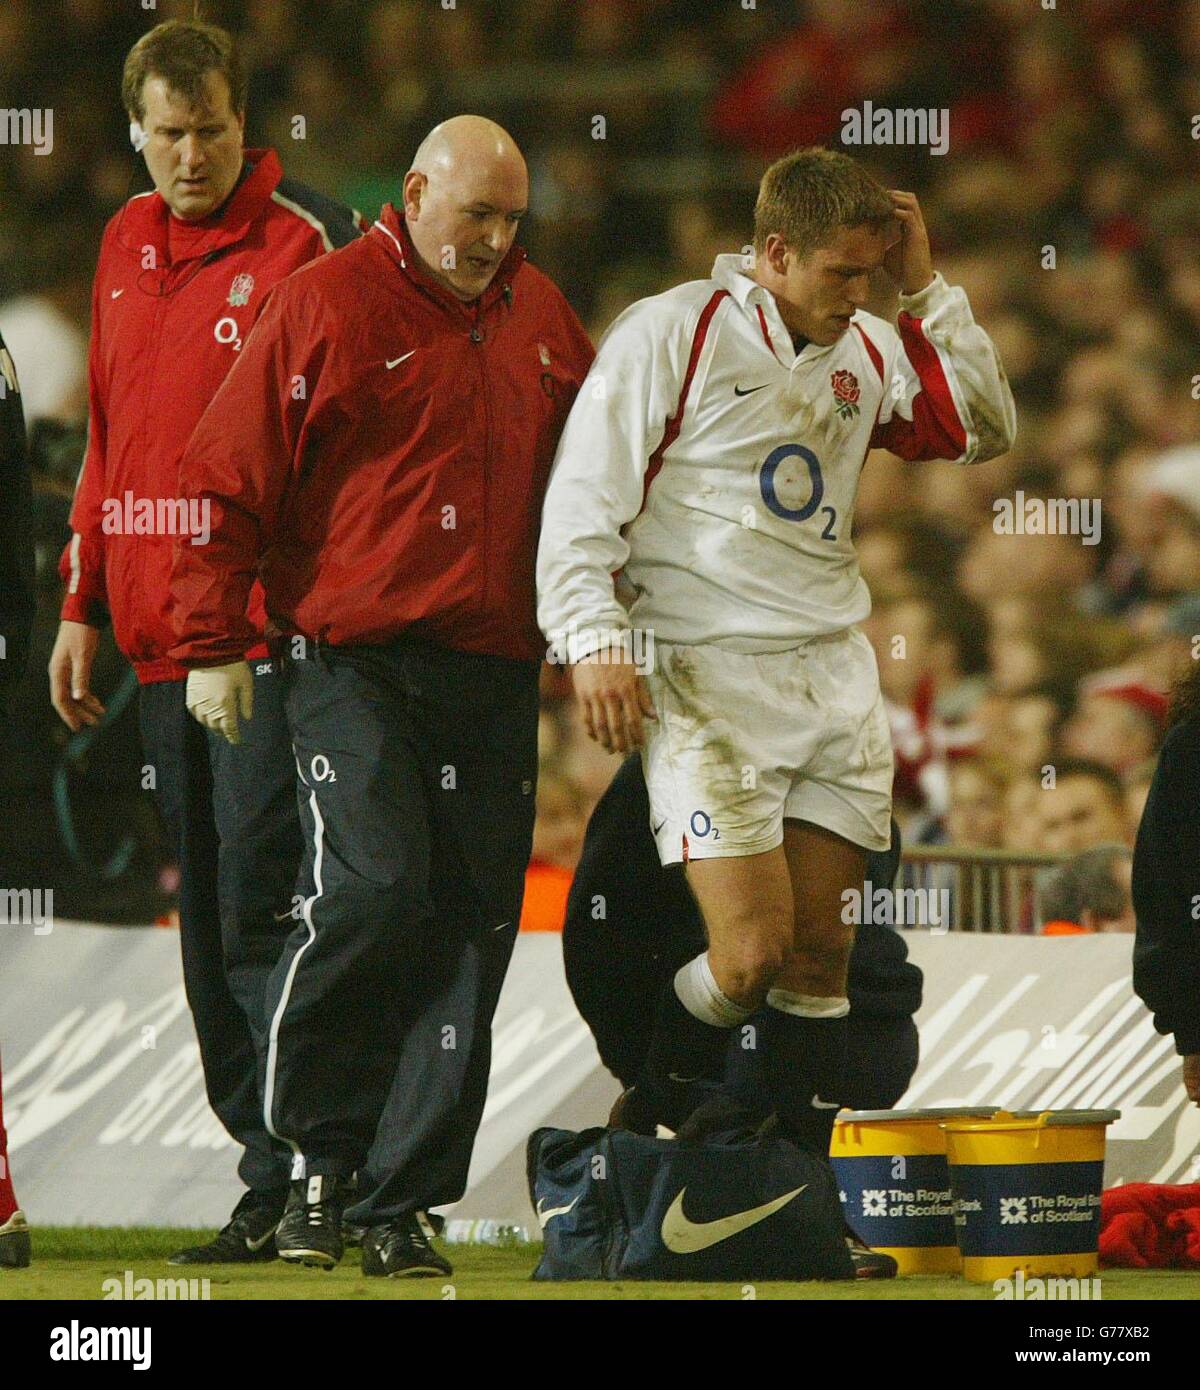 England's Jonny Wilkinson is taken off with injury during his team's 26-9 defeat victory over Wales in their RBS 6 Nations Championship match at the Millennium Stadium, Cardiff. Stock Photo